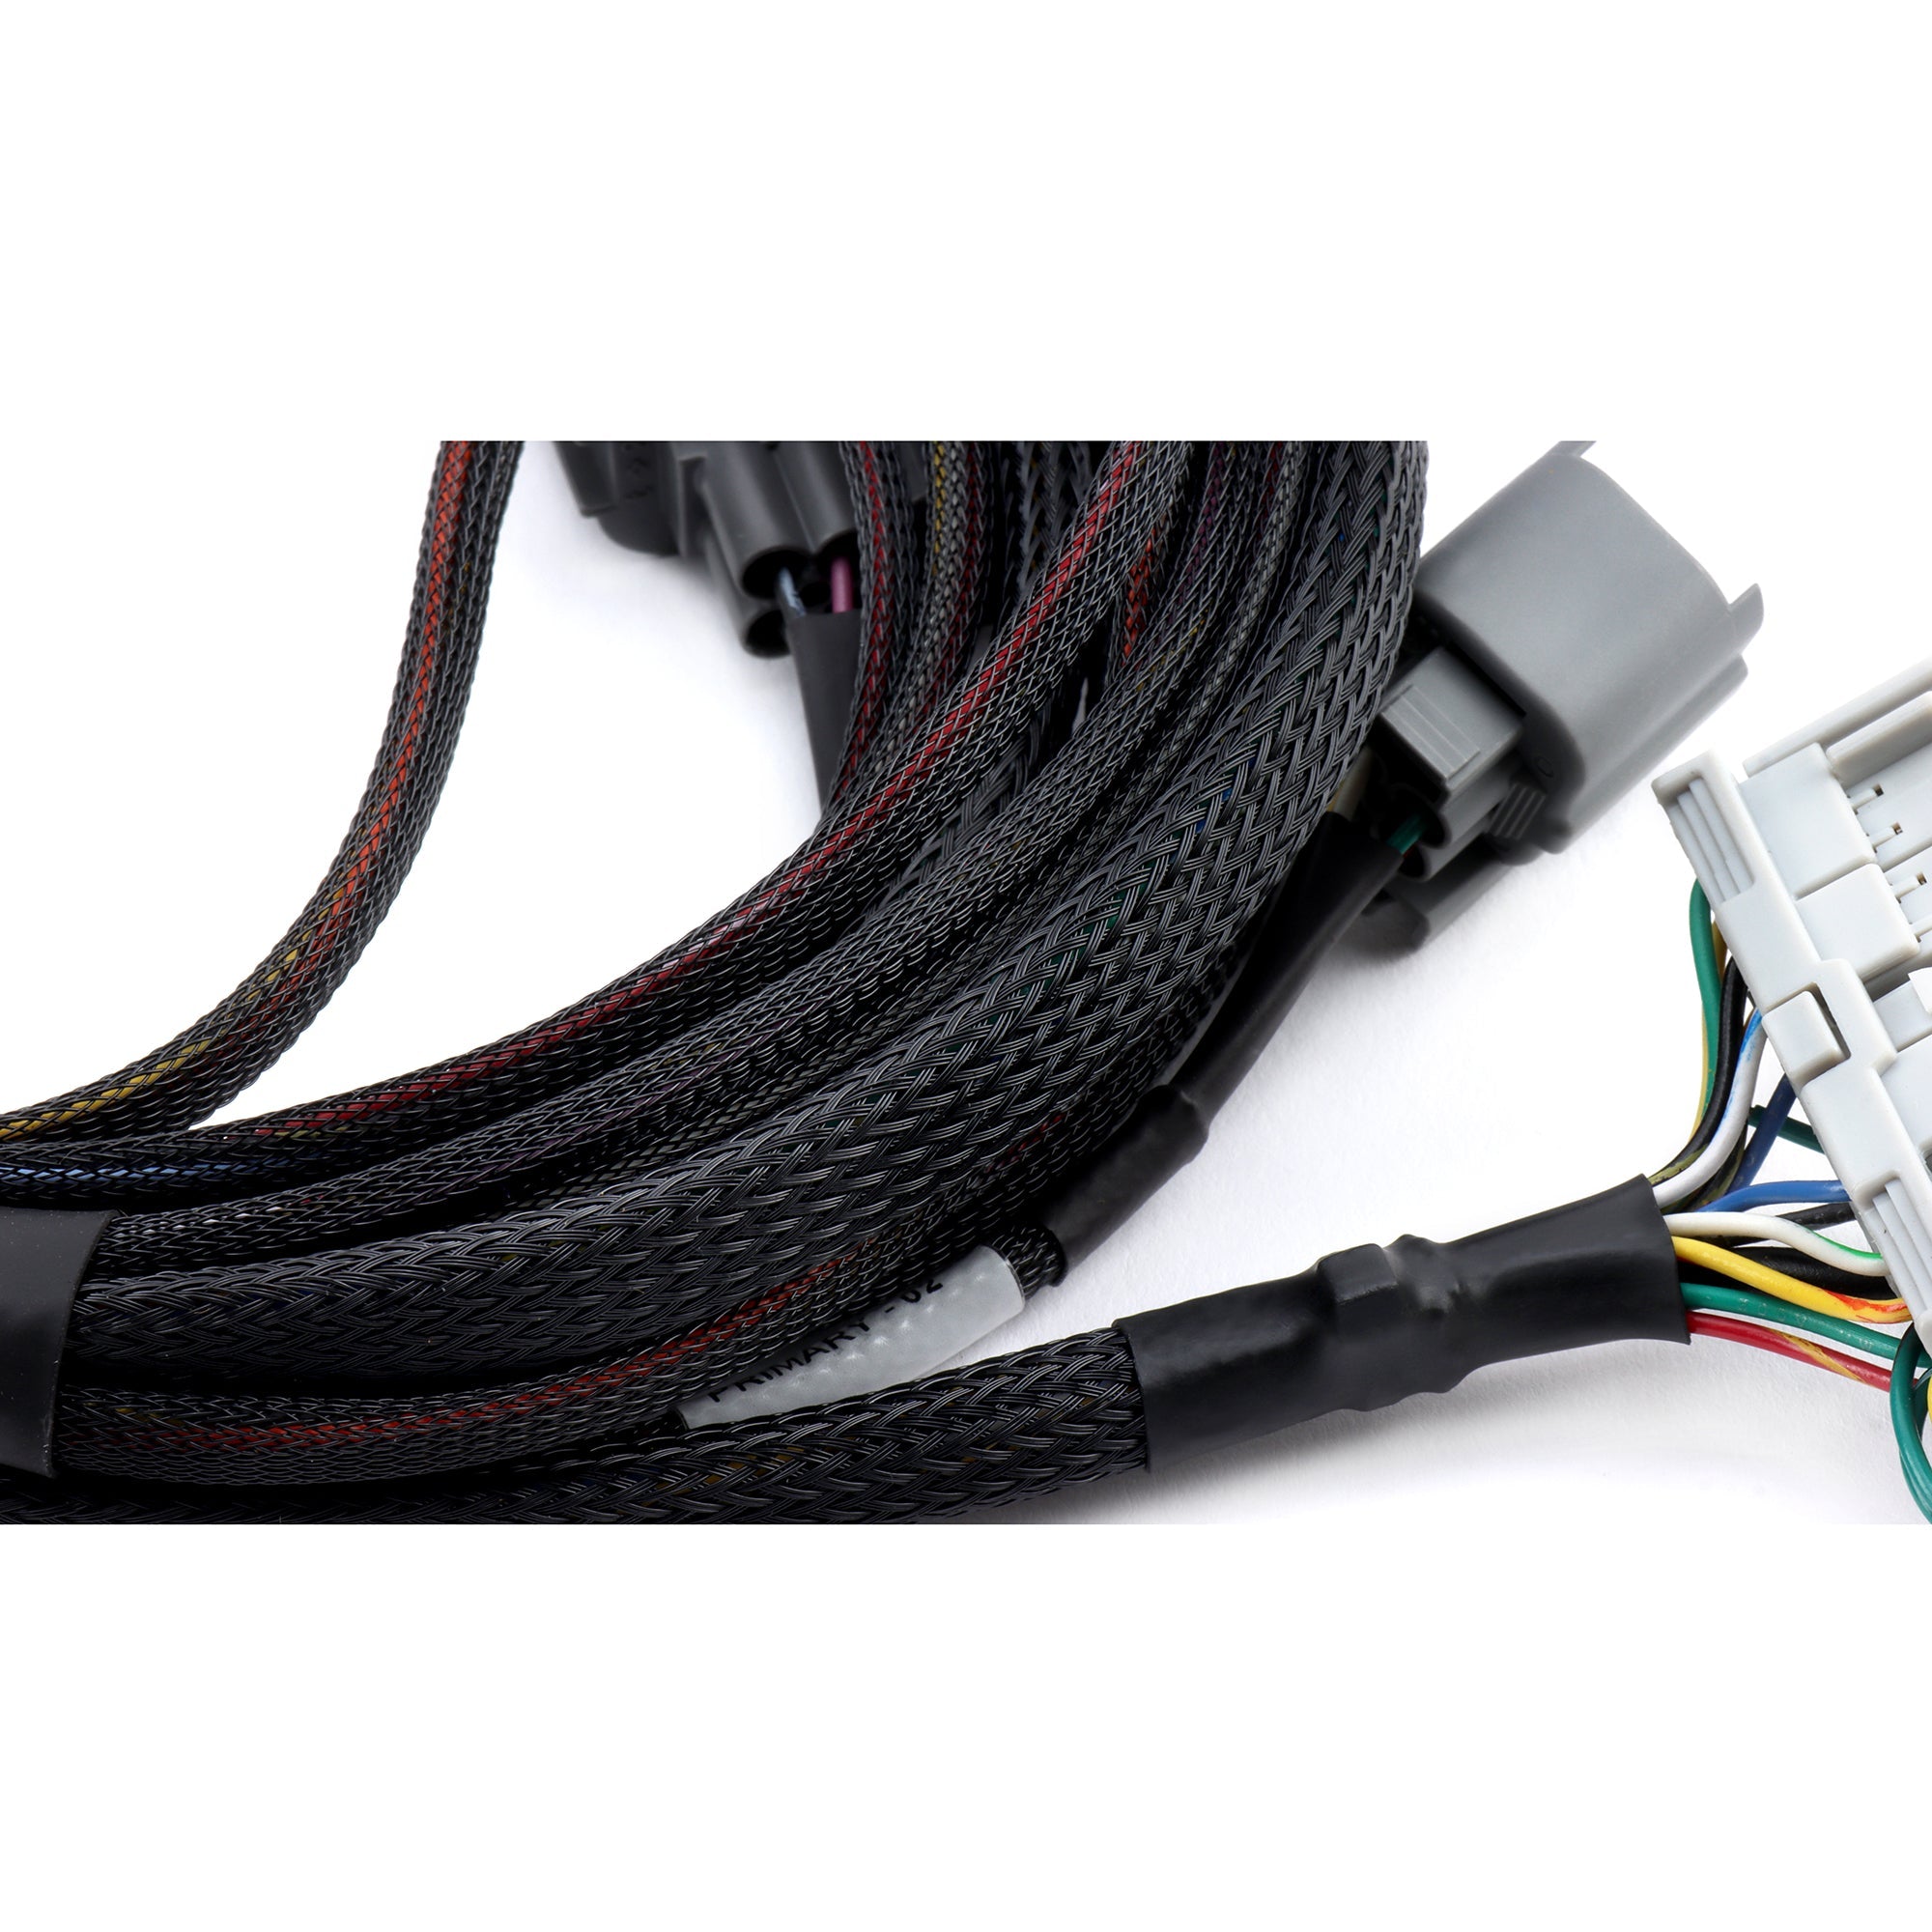 Hybrid Racing K-Series Swap Conversion Wiring Harness (92-95 Civic & 93-97 Delsol & 94-01 Integra) HYB-CWH-01-15